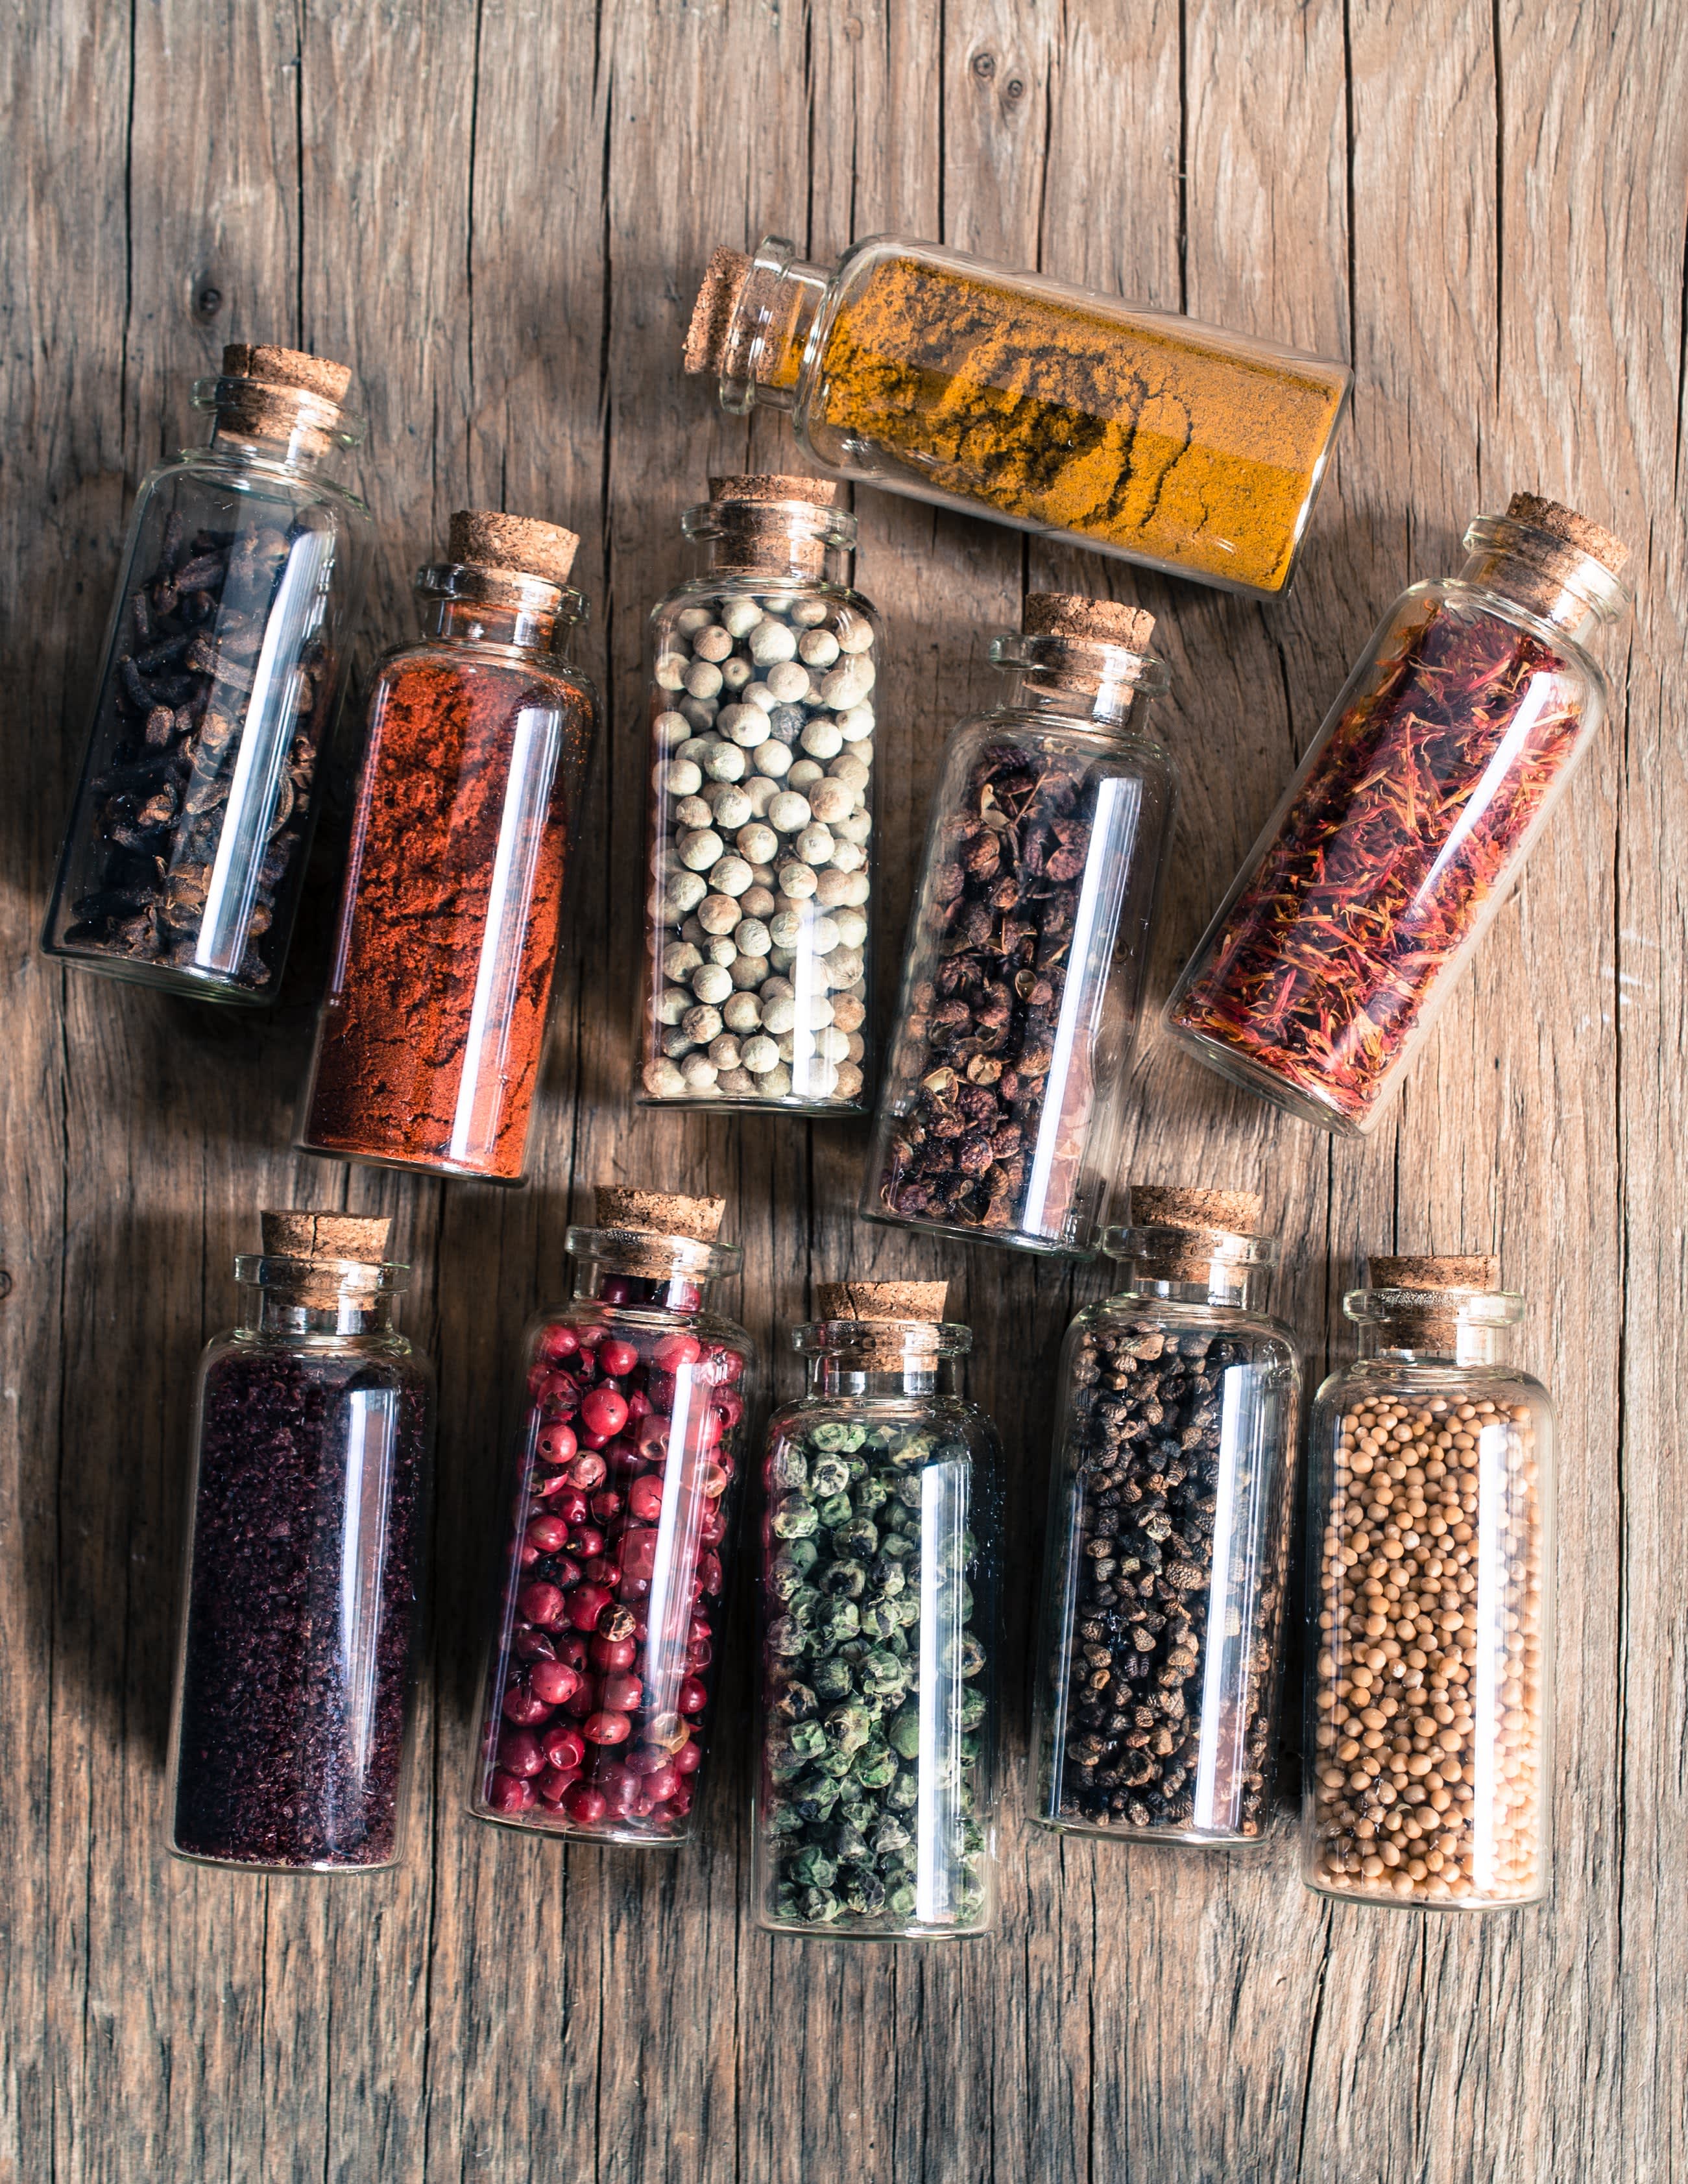 Do Spices Expire? A Guide to 30 Common Dried Herbs and Spices